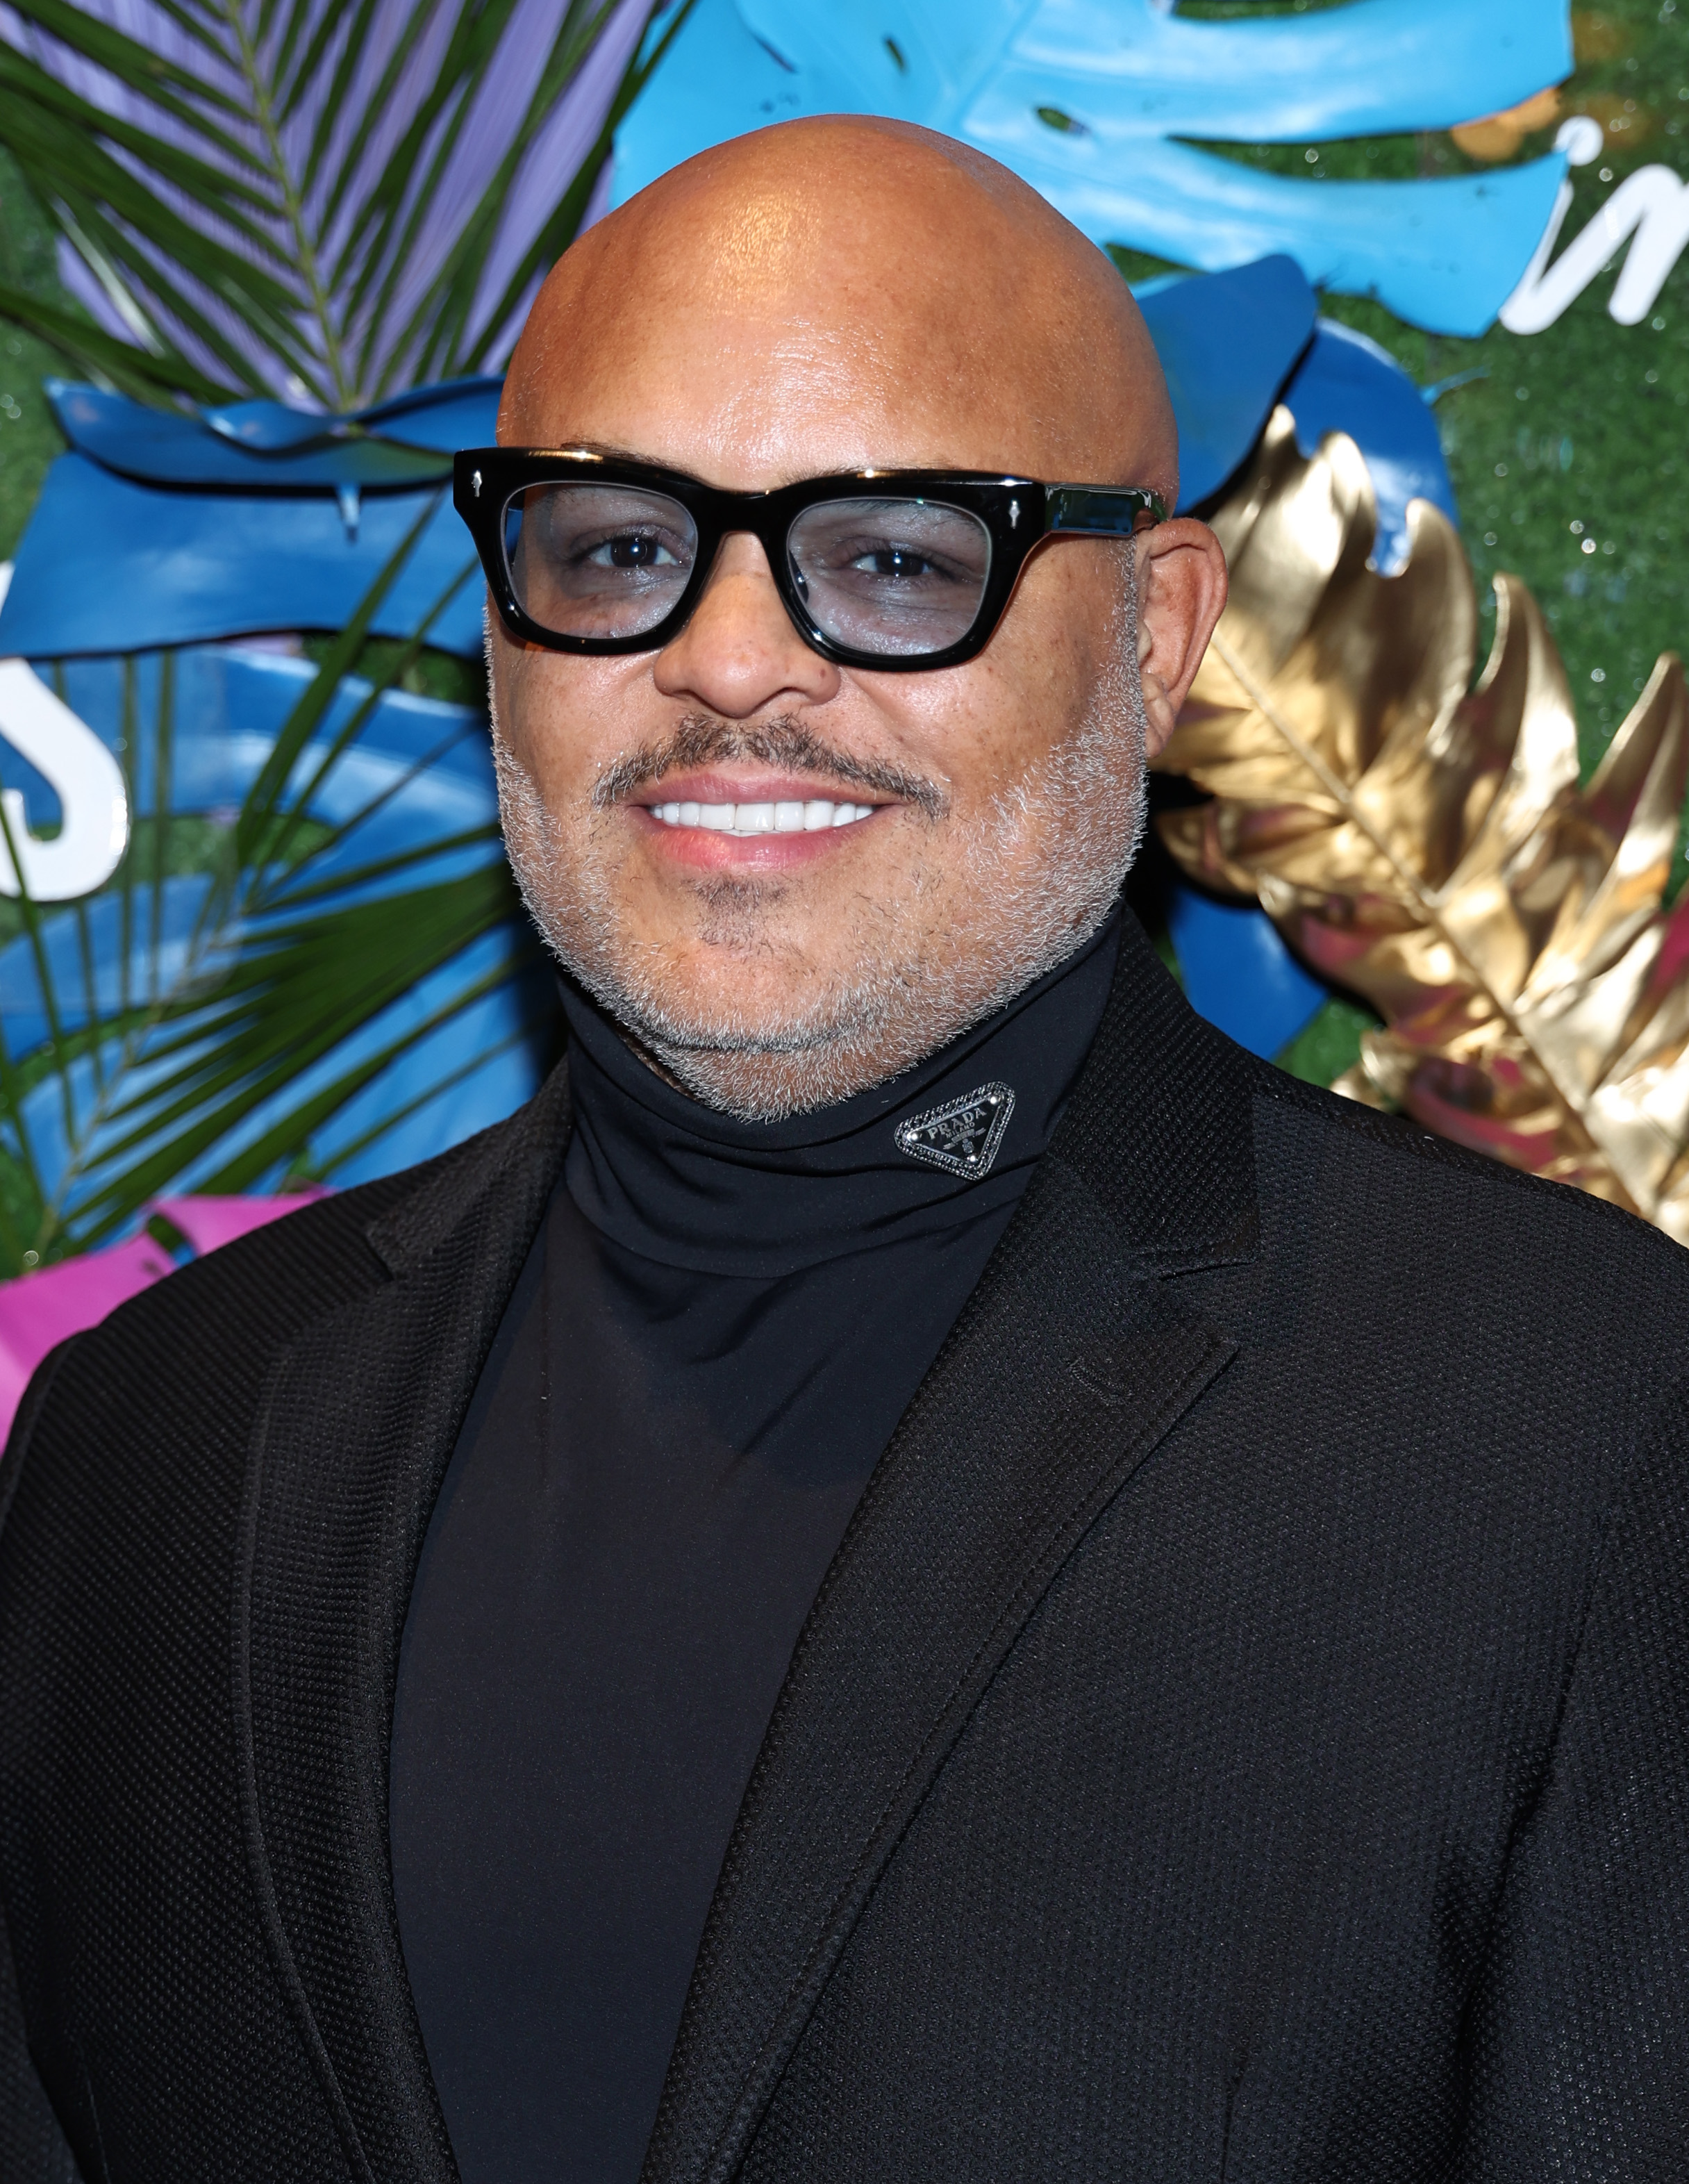 Israel Houghton attends The 2022 Merge Awards at Beverly Wilshire, A Four Seasons Hotel on November 5, 2022, in Beverly Hills, California. | Source: Getty Images